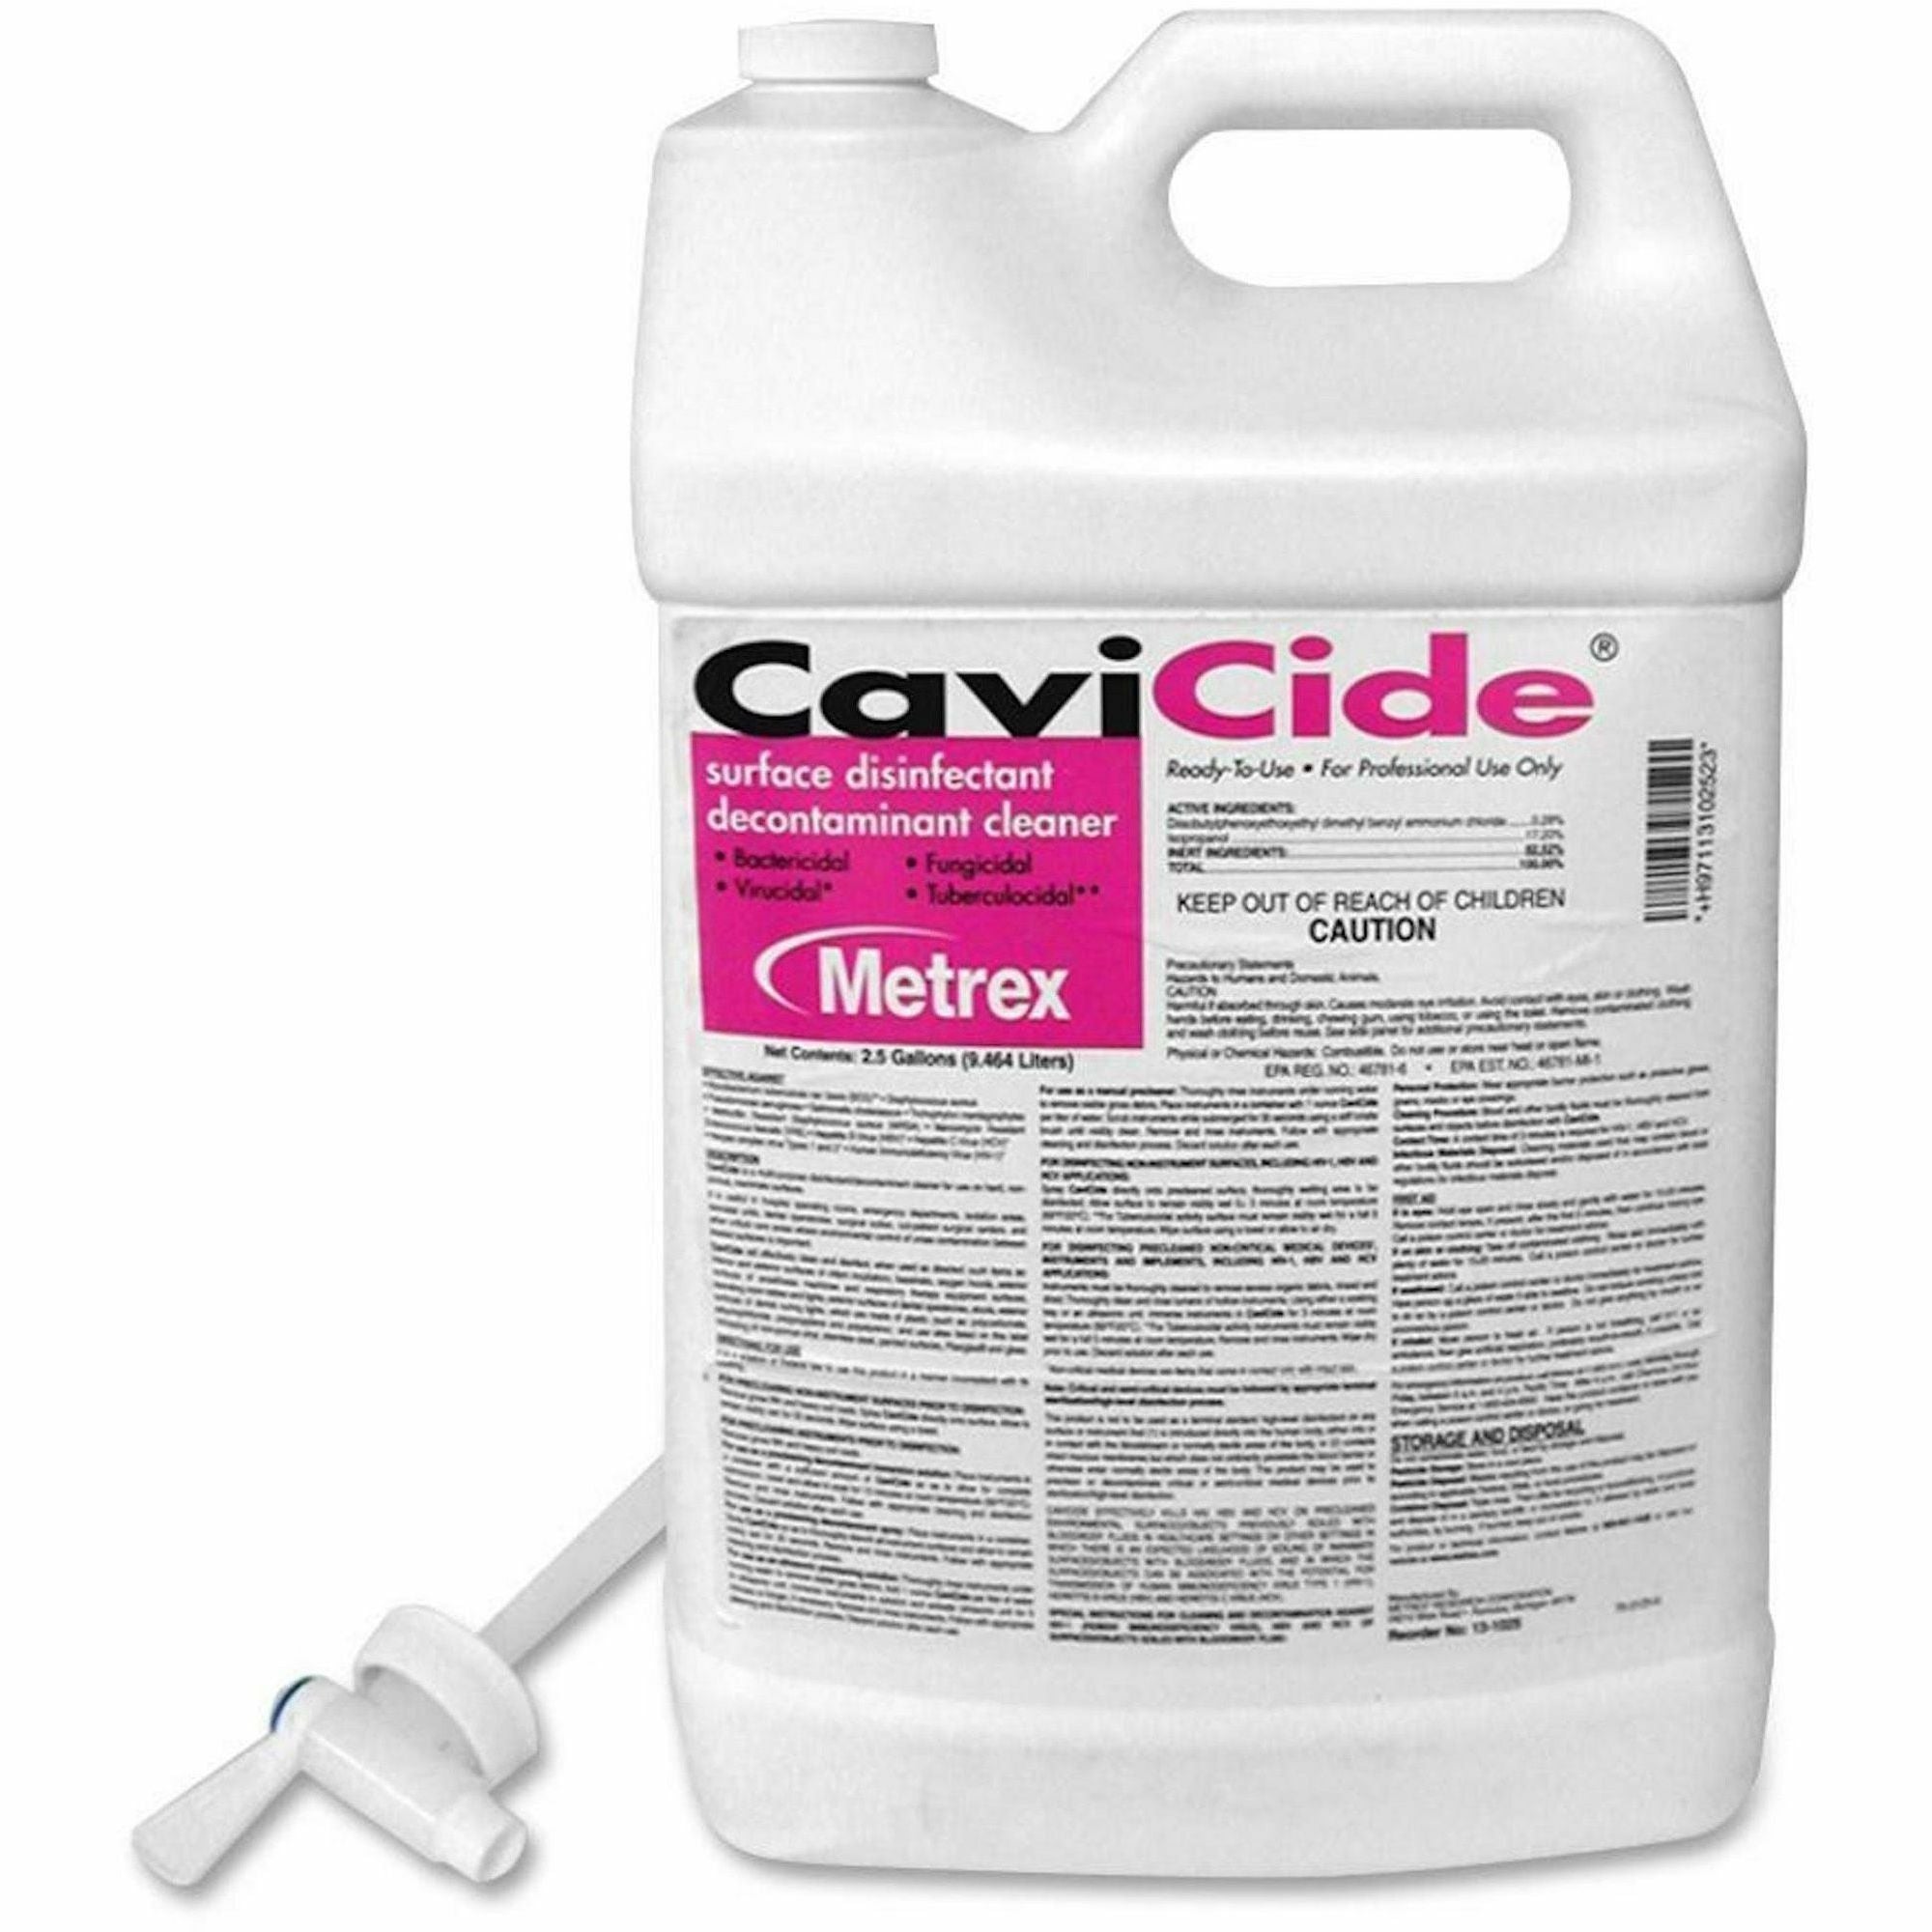 Cavicide Surface Disinfectant Decontaminant Cleaner - 320 fl oz (10 quart) - 1 Each - Disinfectant, Non-toxic, Rinse-free, Fragrance-free, Caustic-free